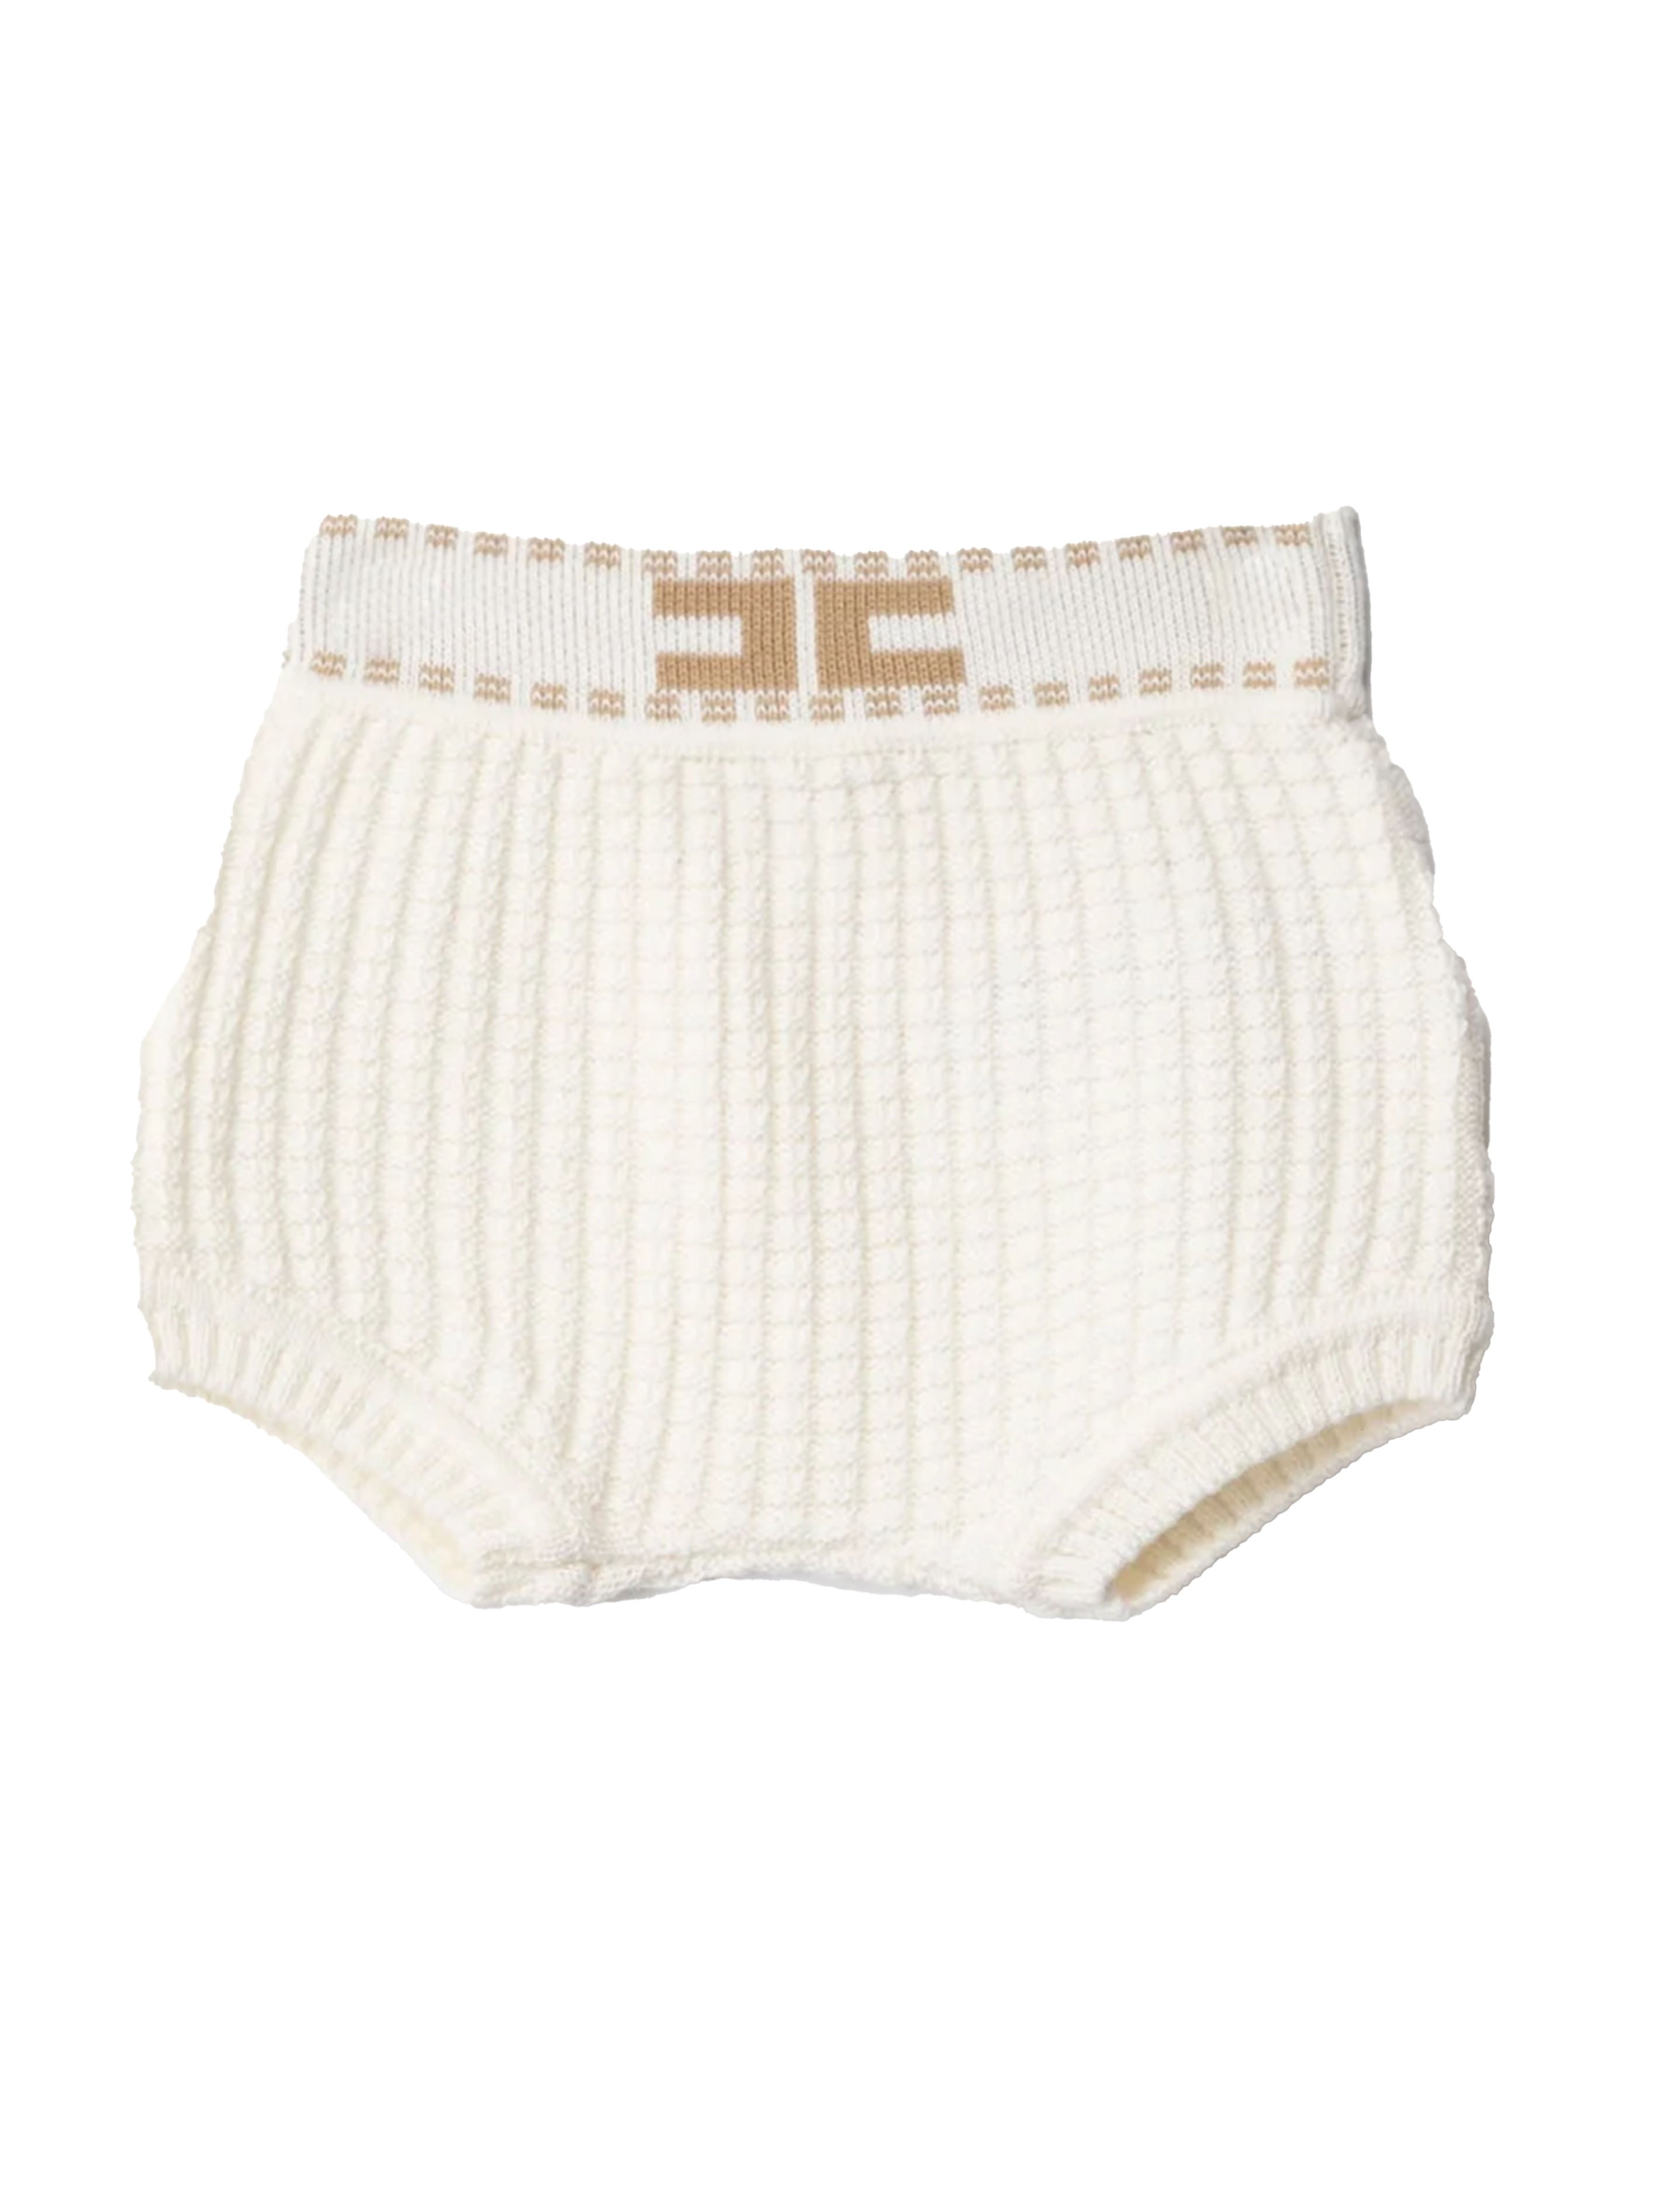 Ivory knitted baby culotte